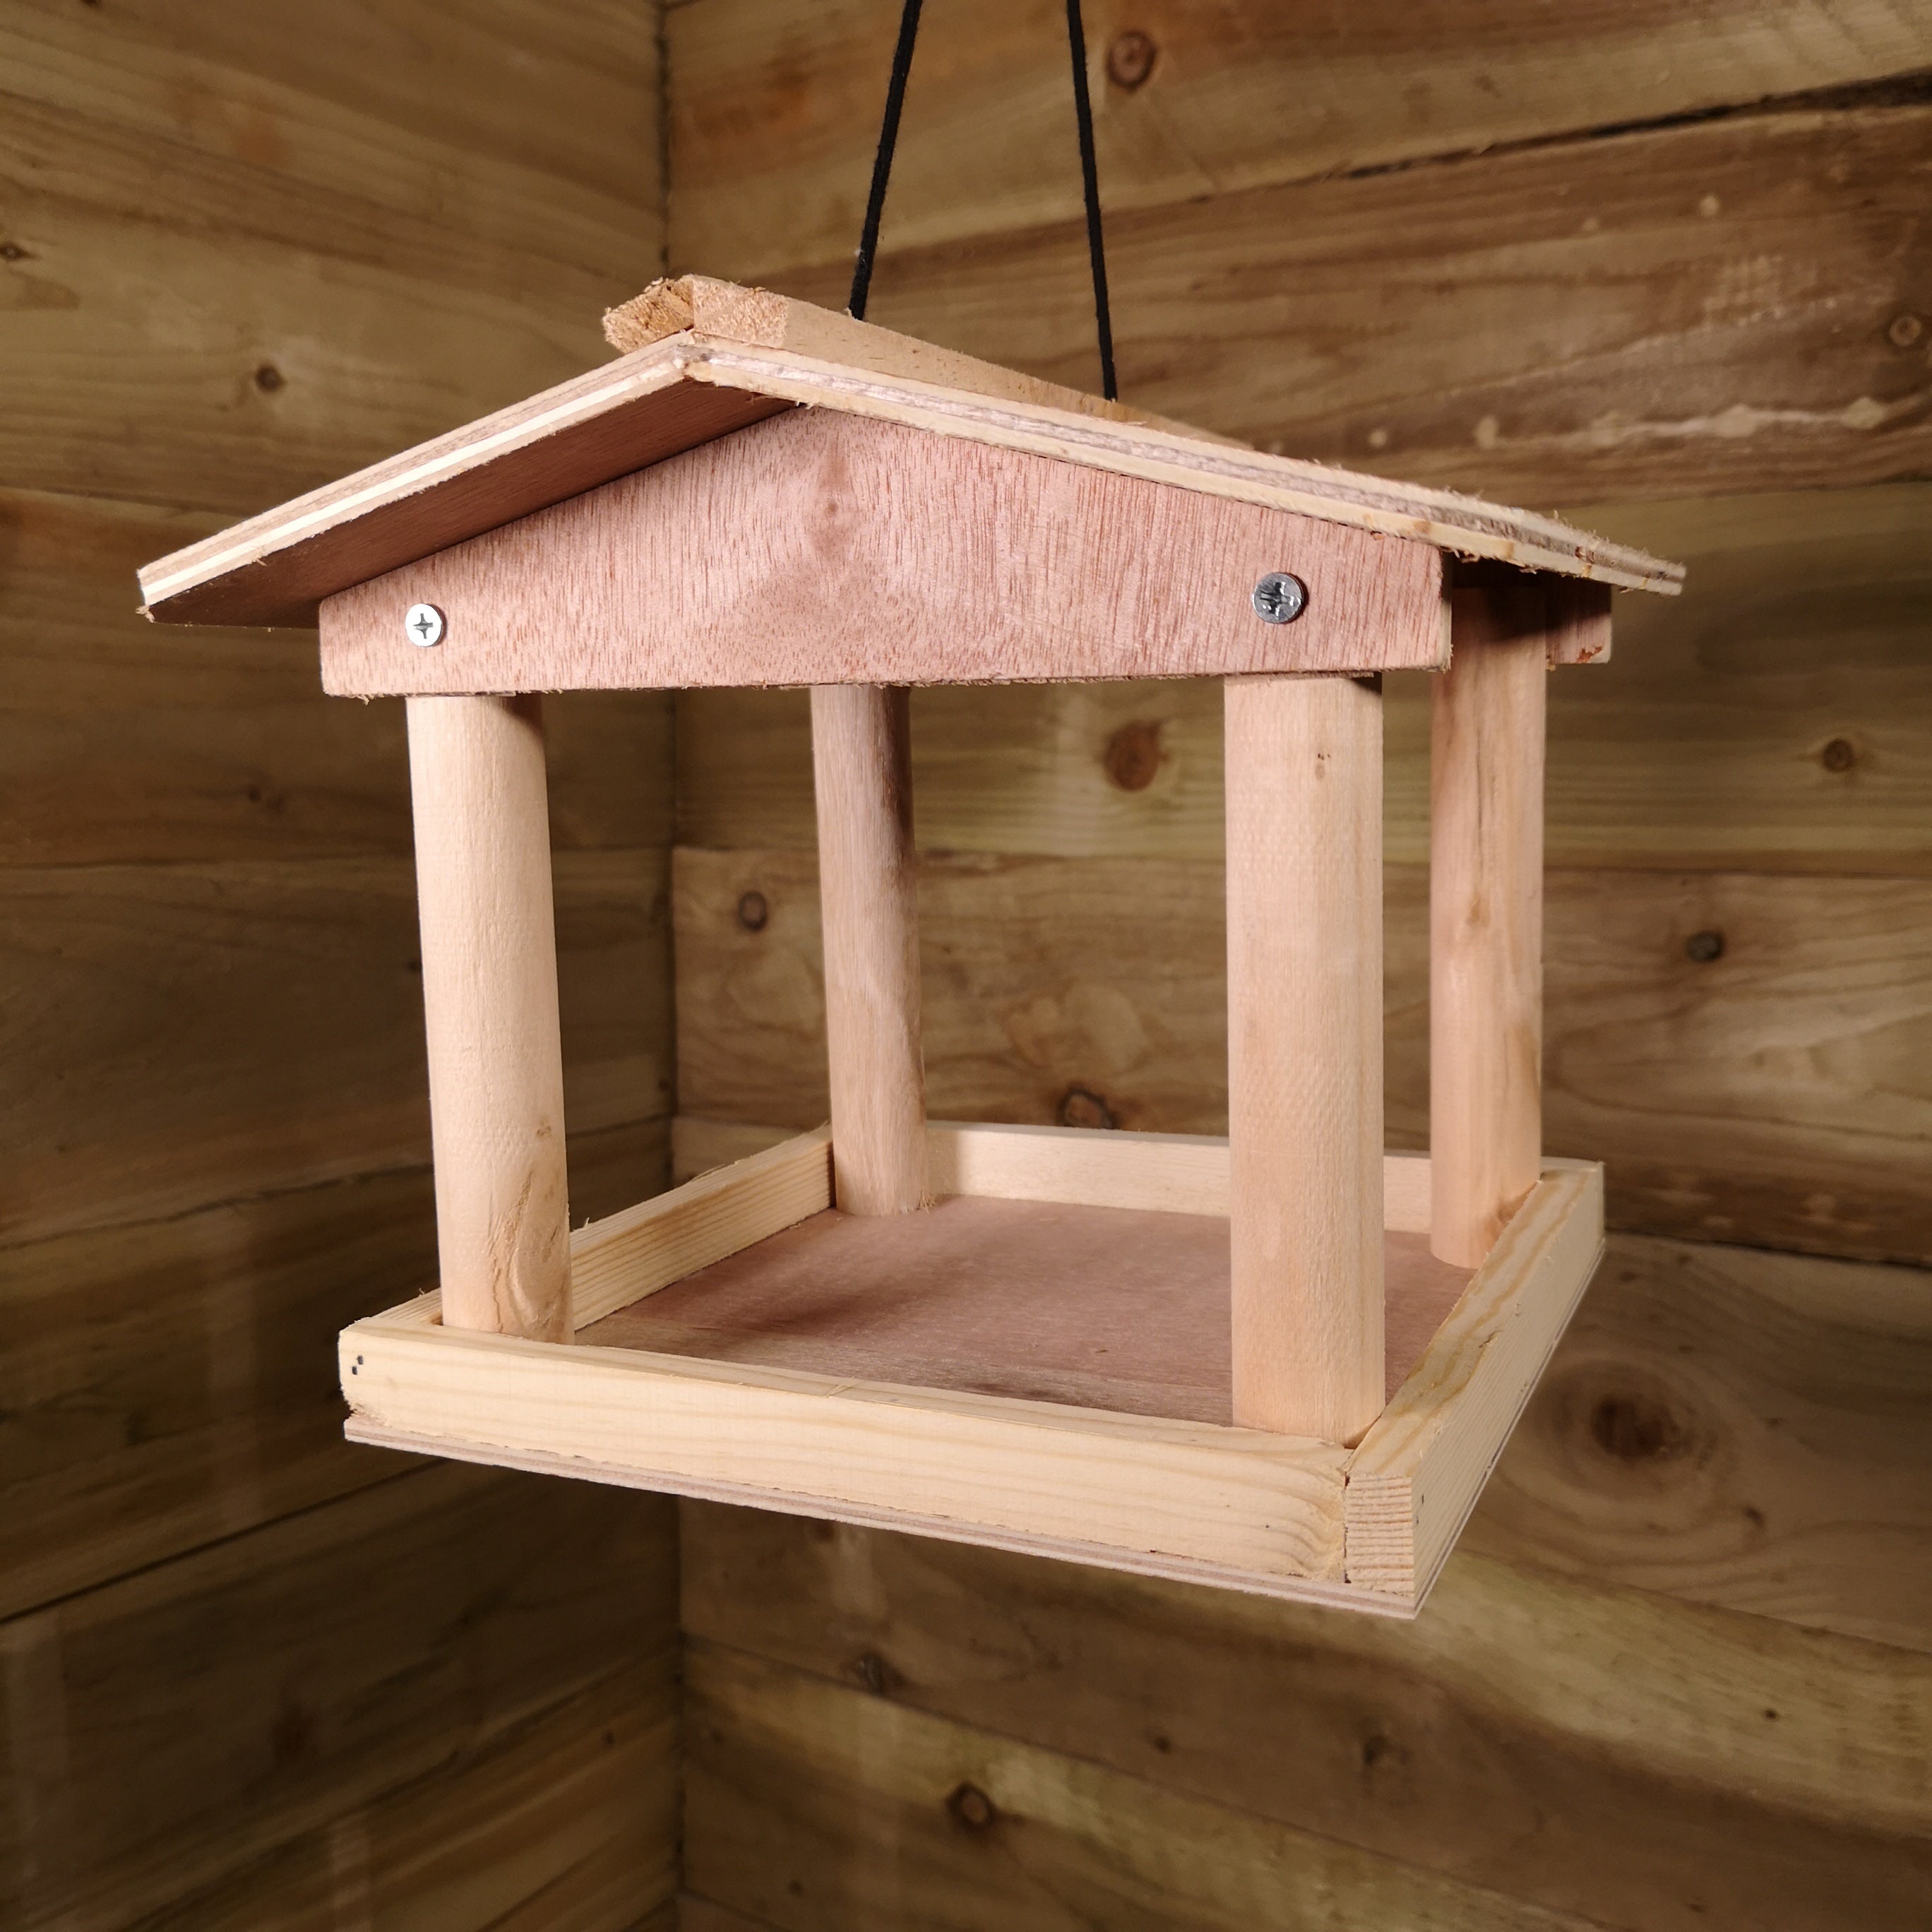 Hanging Wooden Garden Bird Seed Feeder Table with Roof